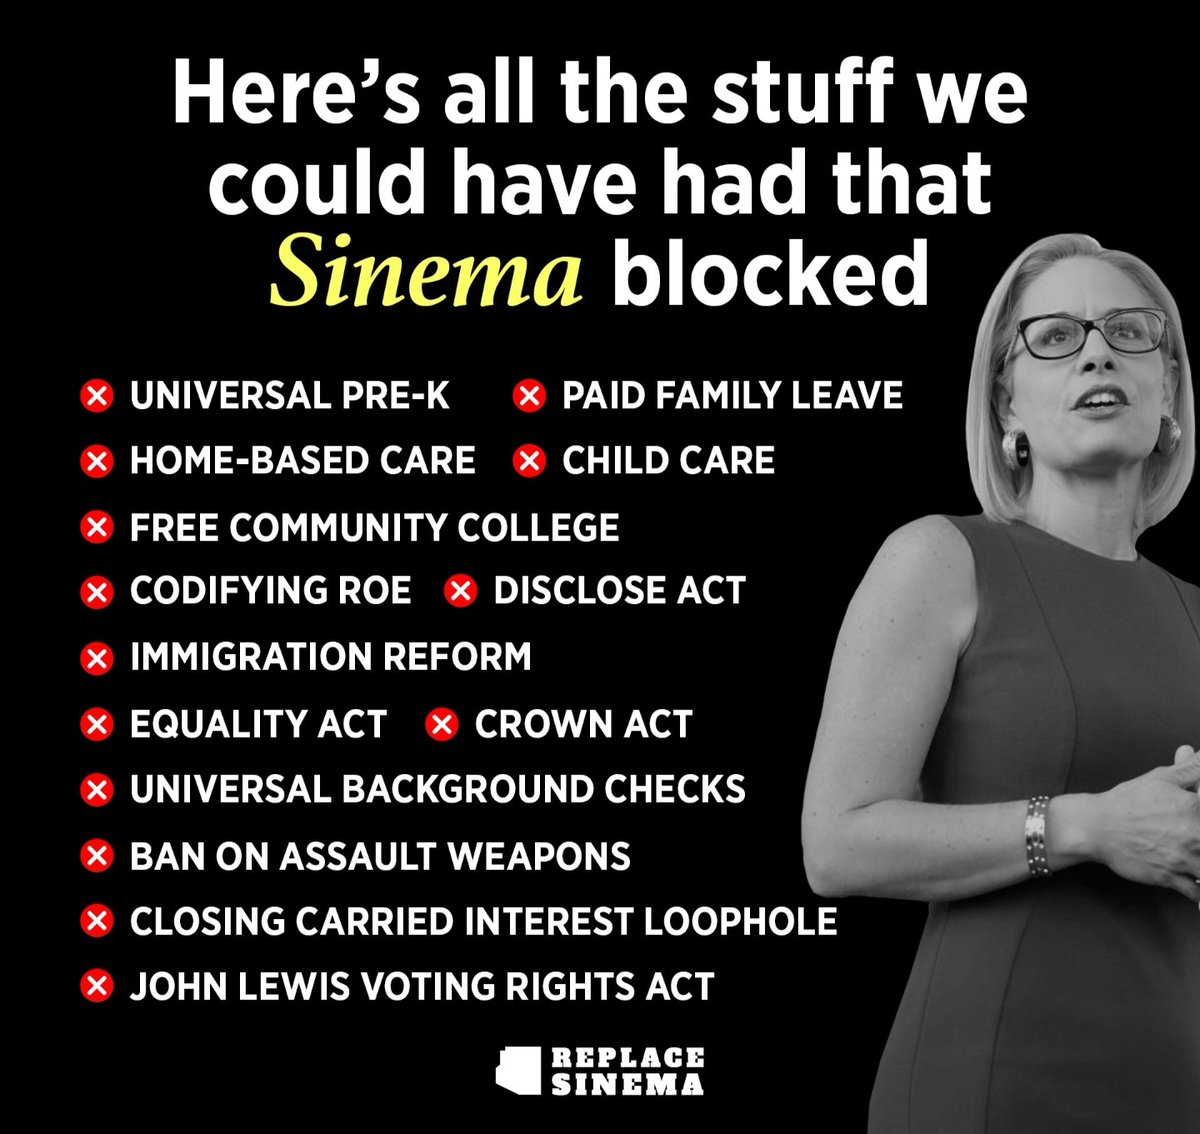 In 2024, let's replace Sen. Kyrsten Sinema with Democrat @RepRubenGallego and prove to Arizonans that democracies deliver. Sinema left the Democratic Party last year after refusing to support the Voting Rights Act and codify Roe. She let most Americans down with her actions.